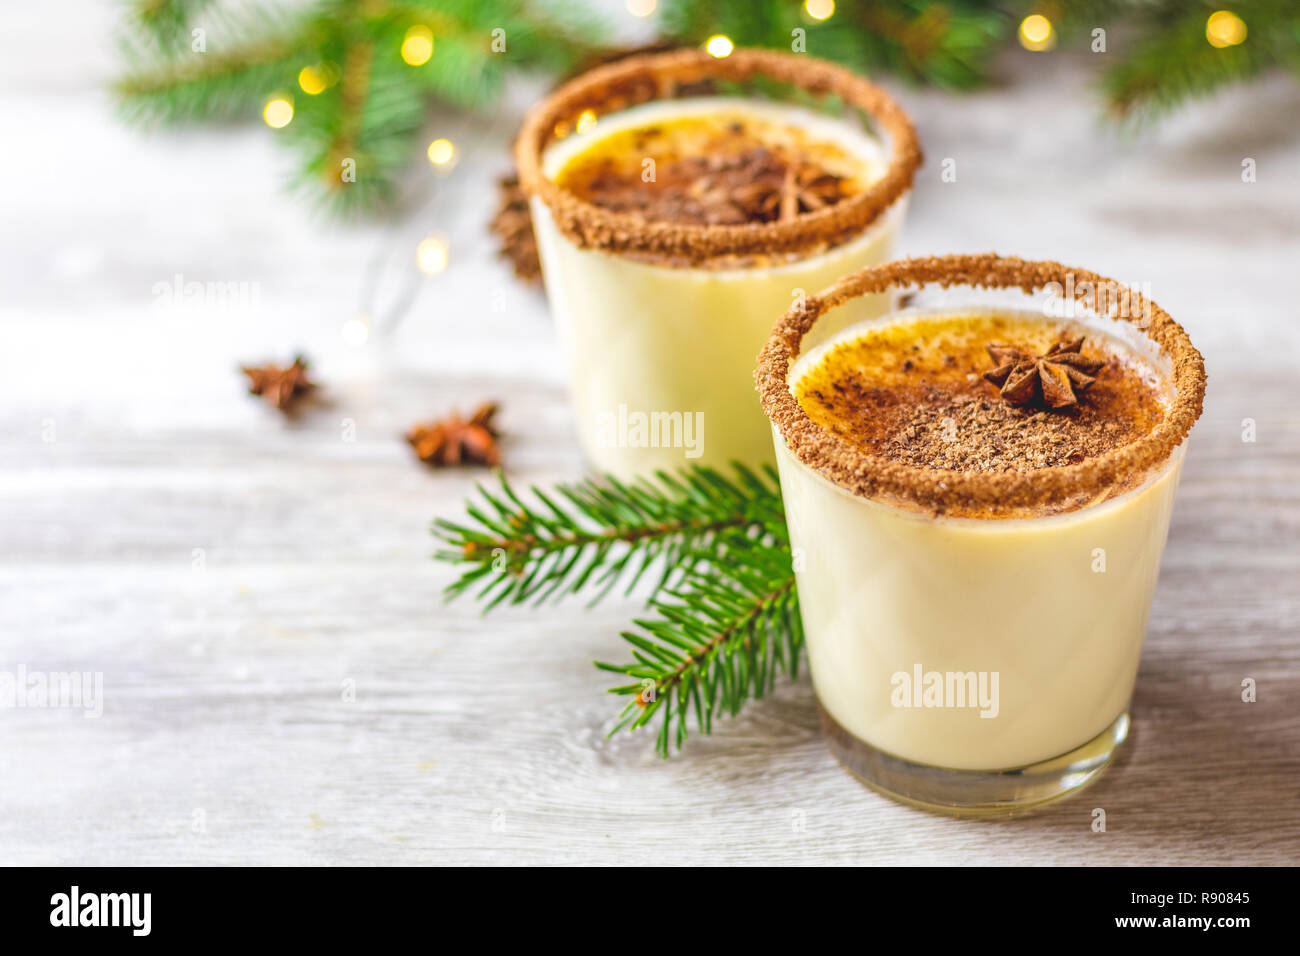 https://c8.alamy.com/comp/R90845/eggnog-with-cinnamon-and-nutmeg-for-christmas-and-winter-holidays-homemade-eggnog-in-glasses-on-wooden-table-surface-shallow-depth-of-the-field-cop-R90845.jpg